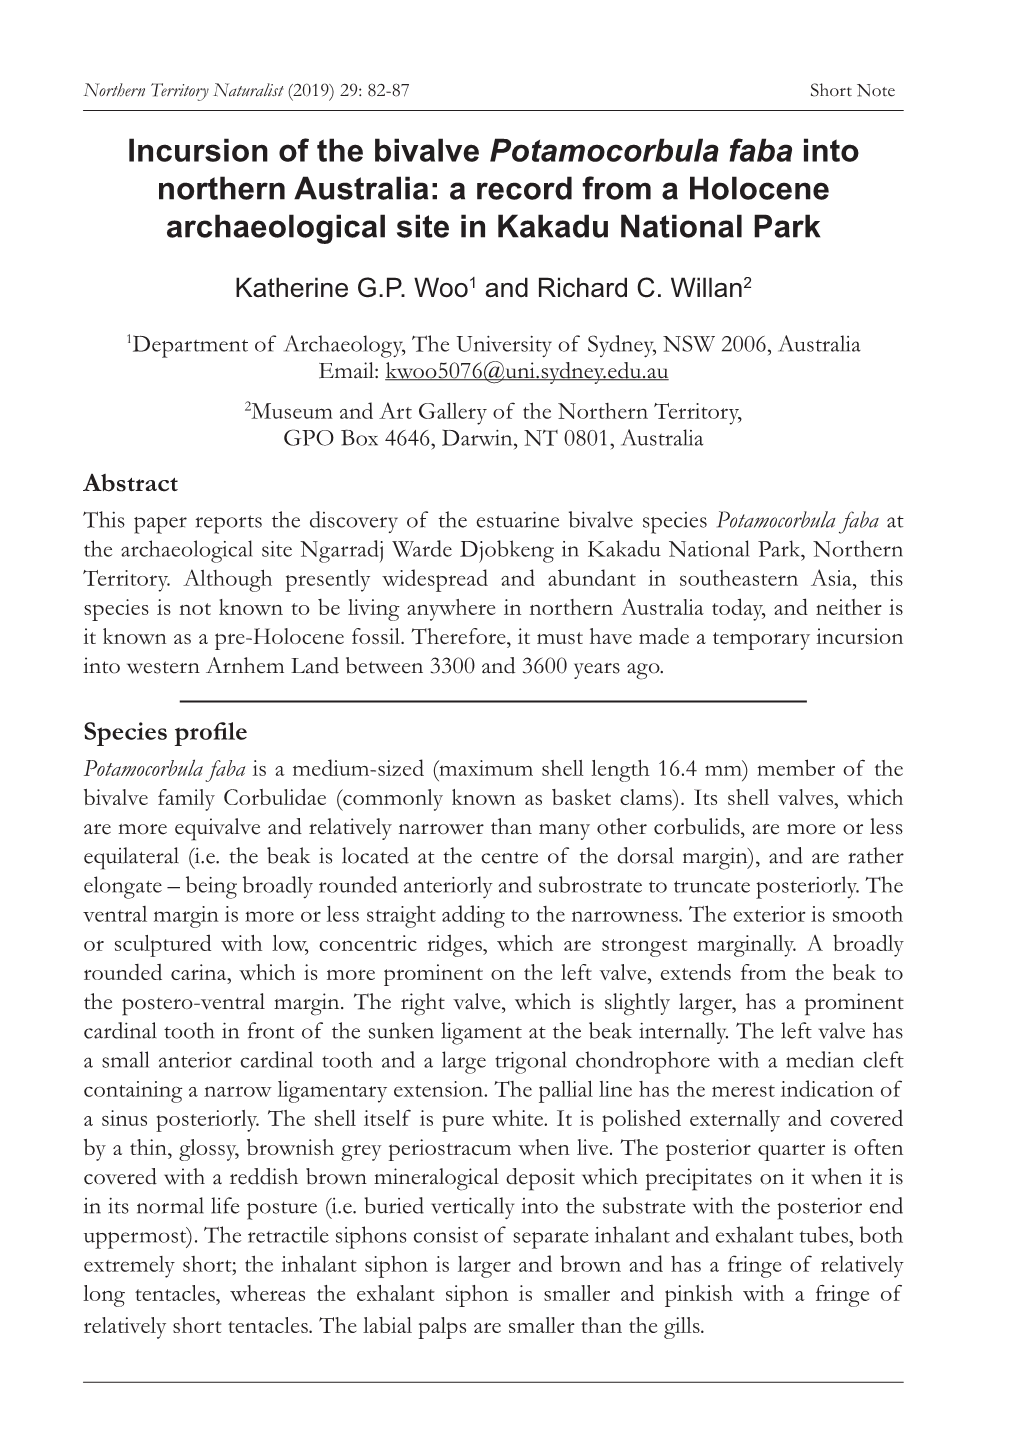 Incursion of the Bivalve Potamocorbula Faba Into Northern Australia: a Record from a Holocene Archaeological Site in Kakadu National Park